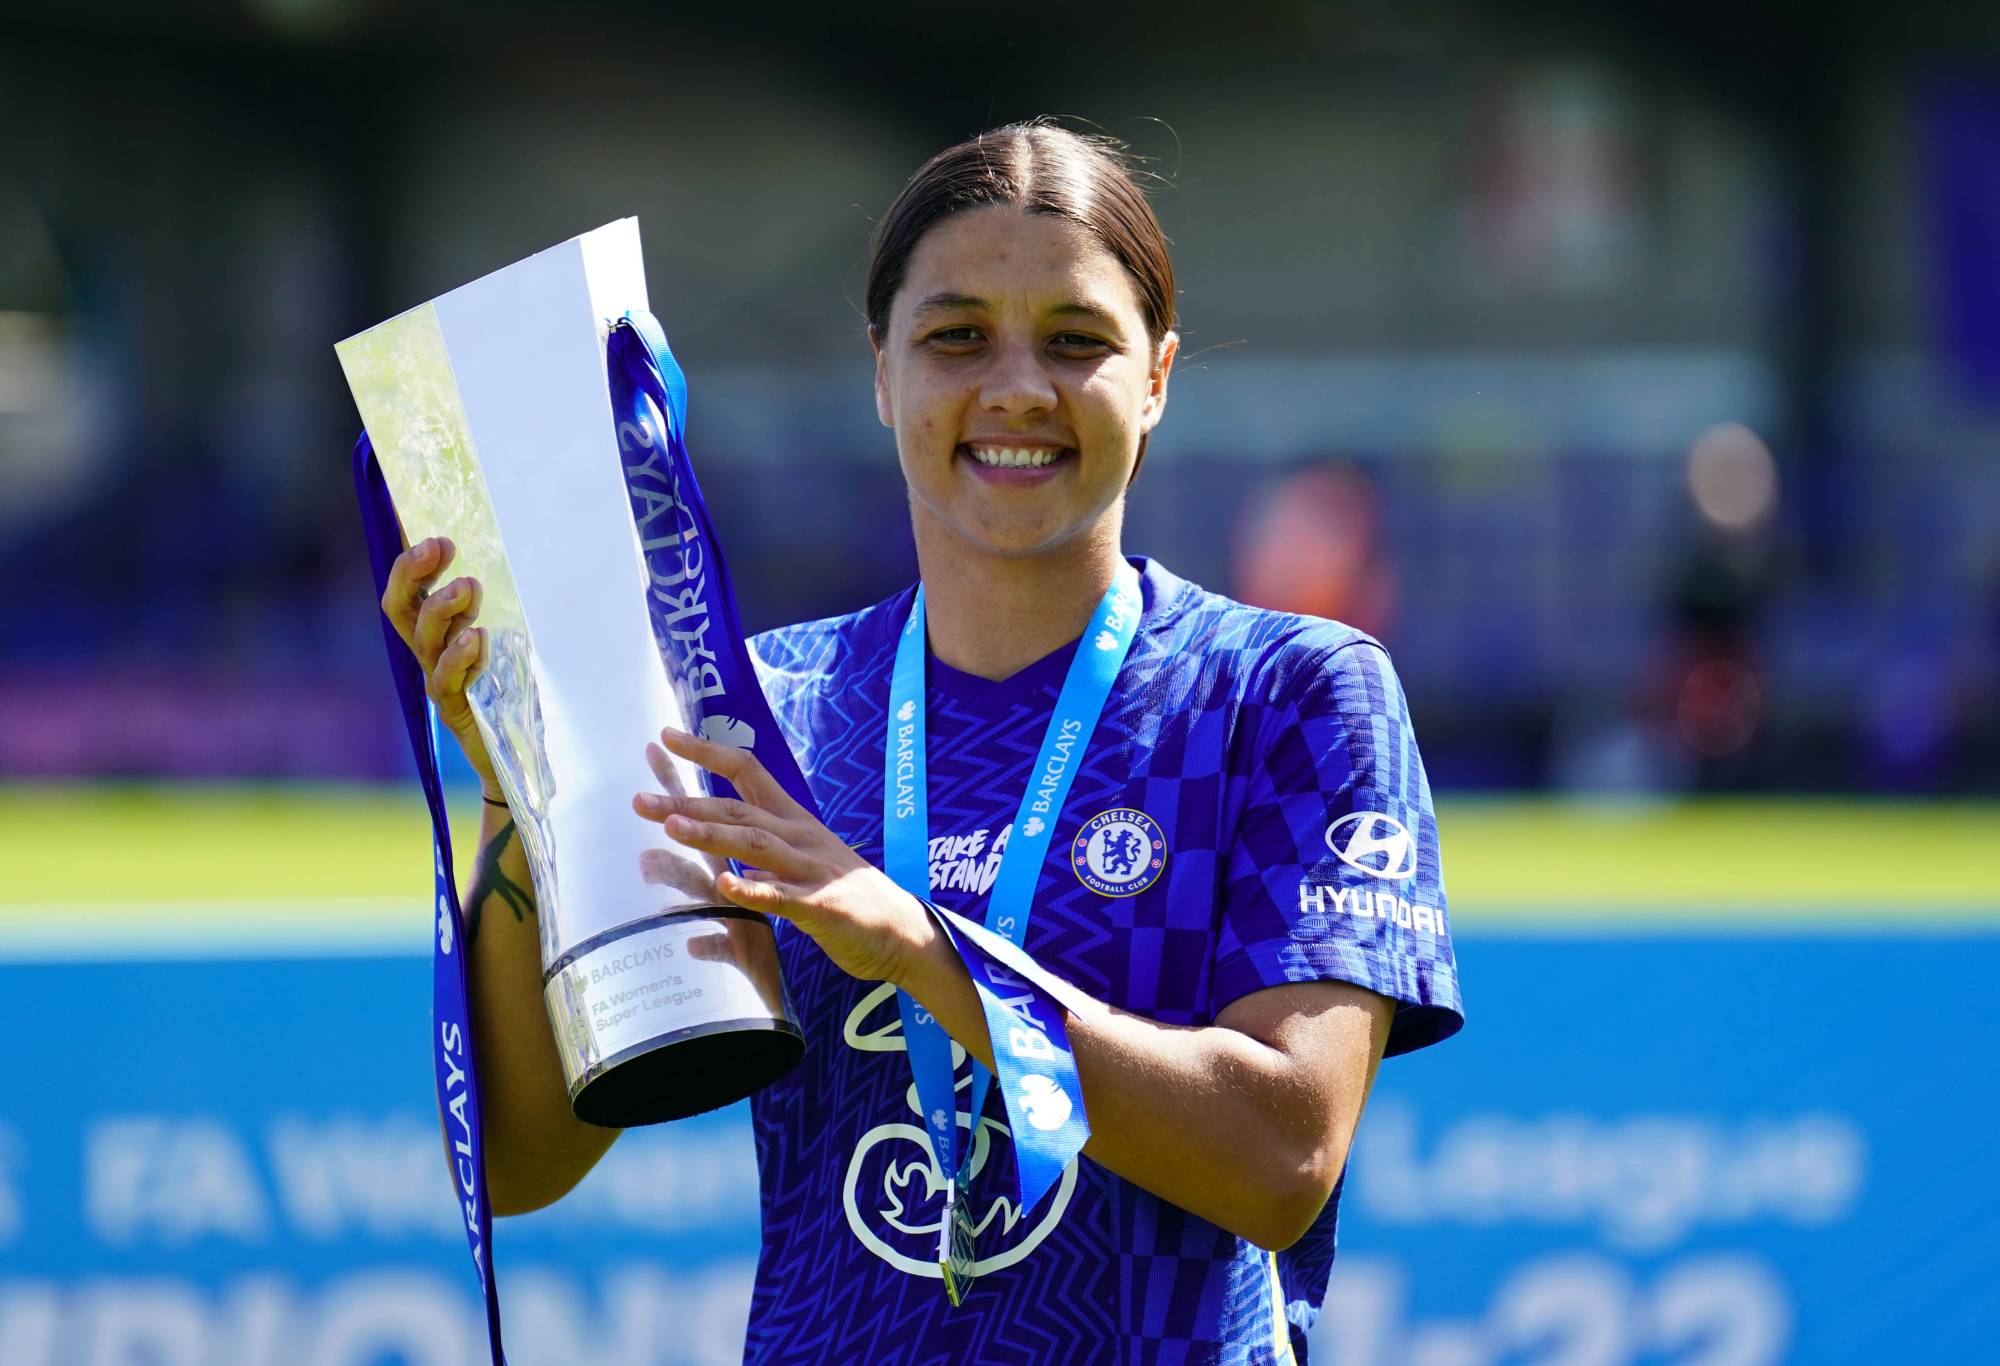 Chelsea's Sam Kerr with the Barclays FA Women's Super League trophy after her side won the competion after the Barclays FA Women's Super League match at Kingsmeadow Stadium, London. Picture date: Sunday May 8, 2022. (Photo by Adam Davy/PA Images via Getty Images)